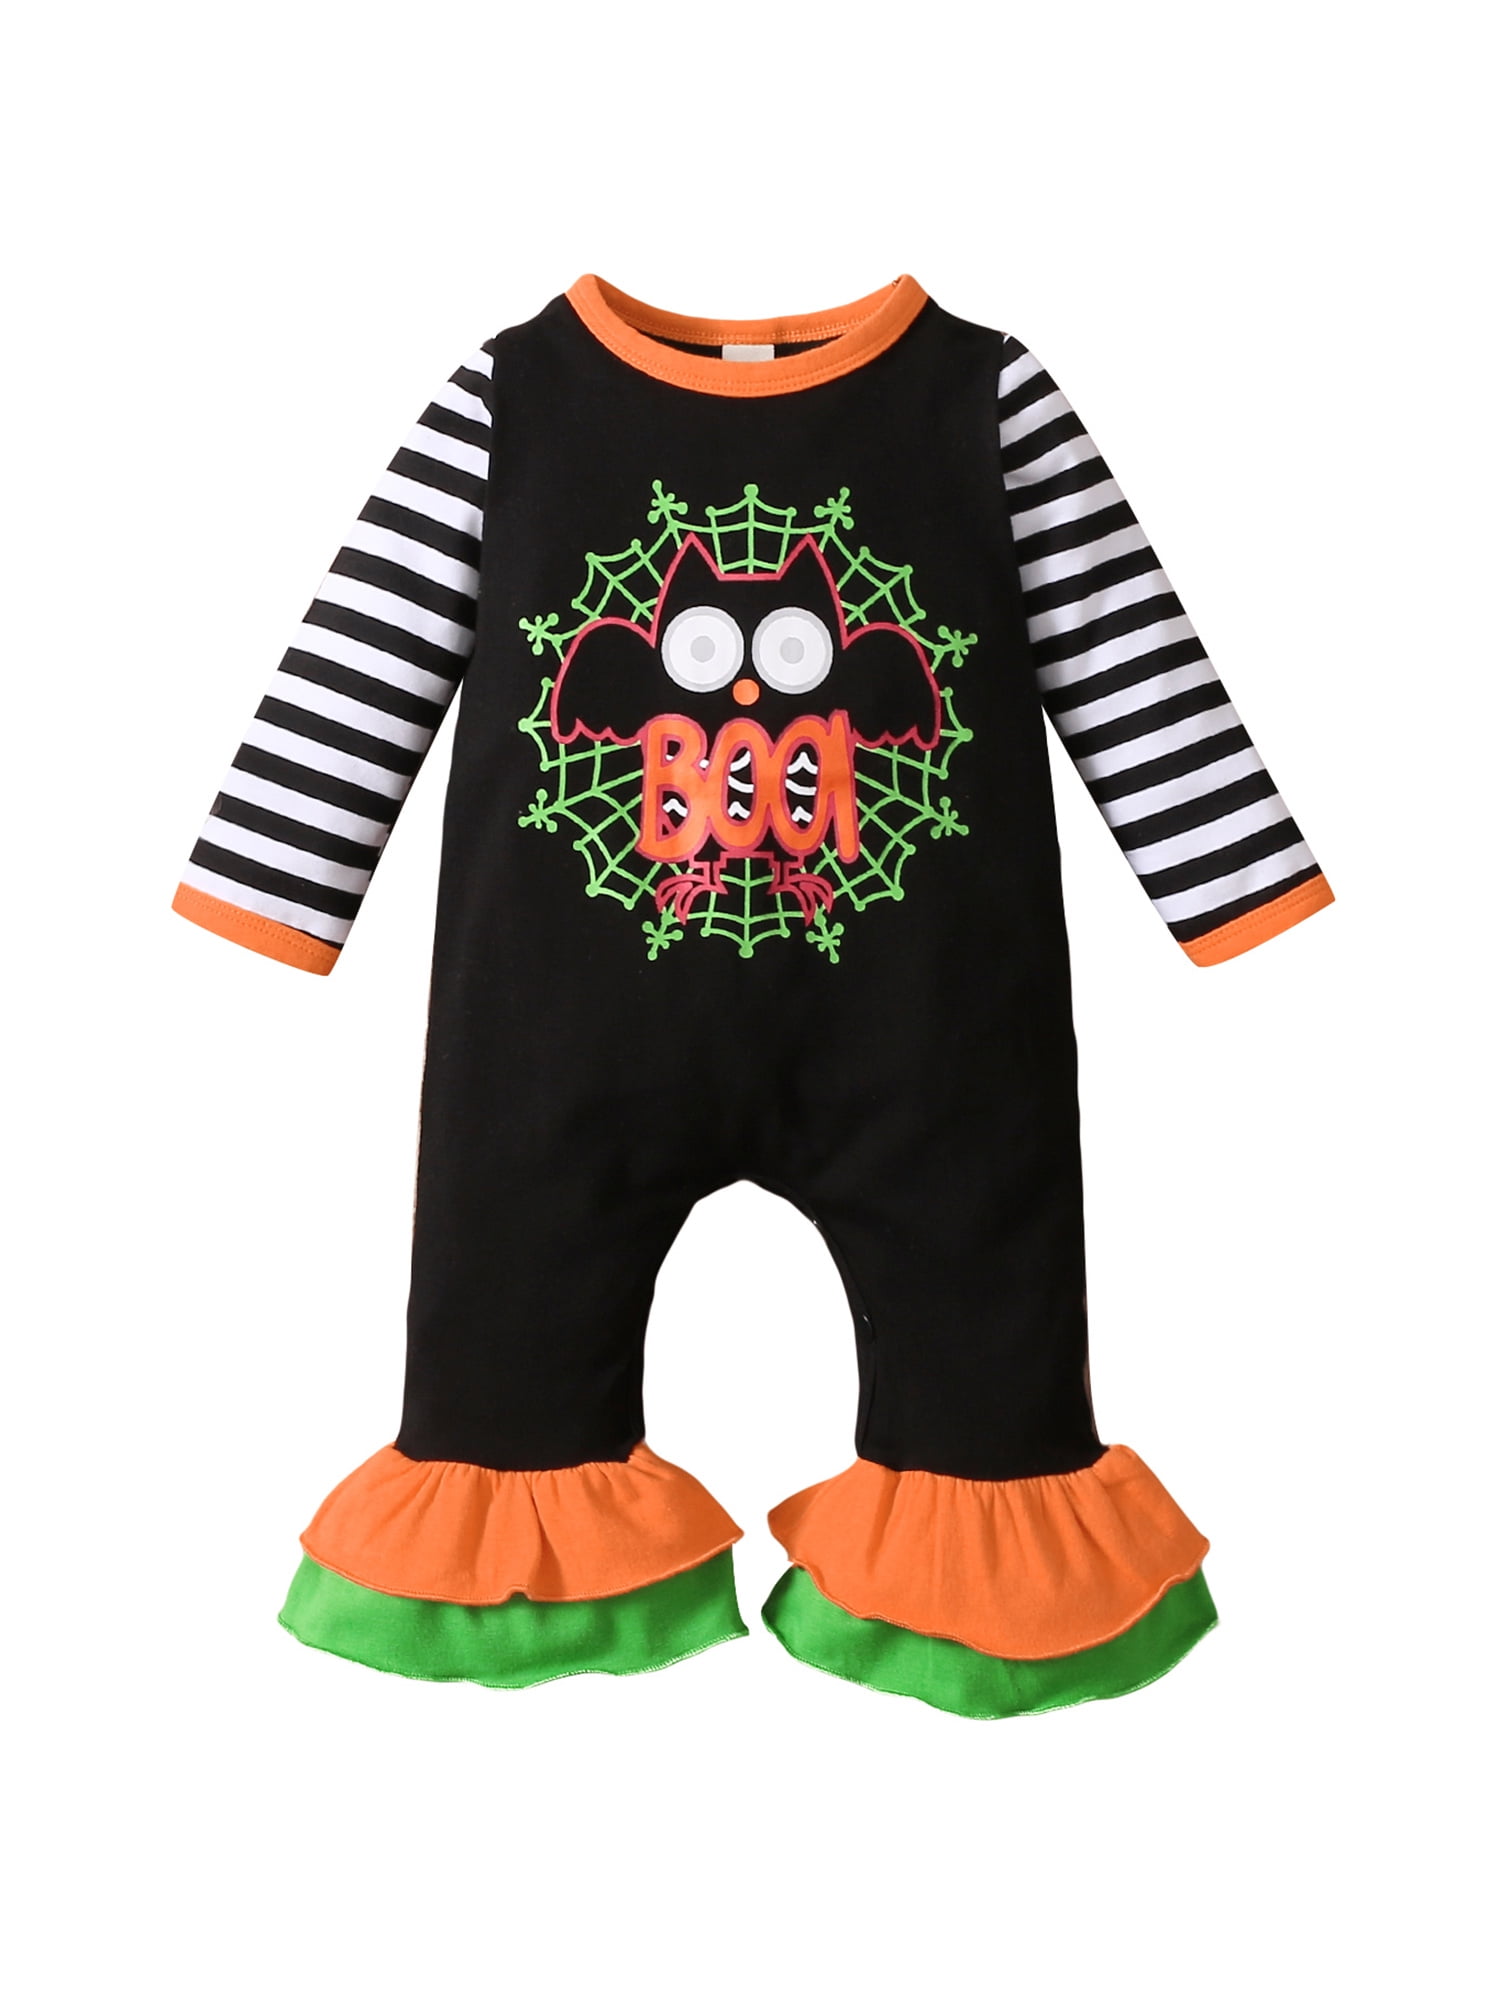 Details about   Carters Halloween Mummy Loves Me Infant Bodysuit SIZE 3, 6 or 9 Months NEW 